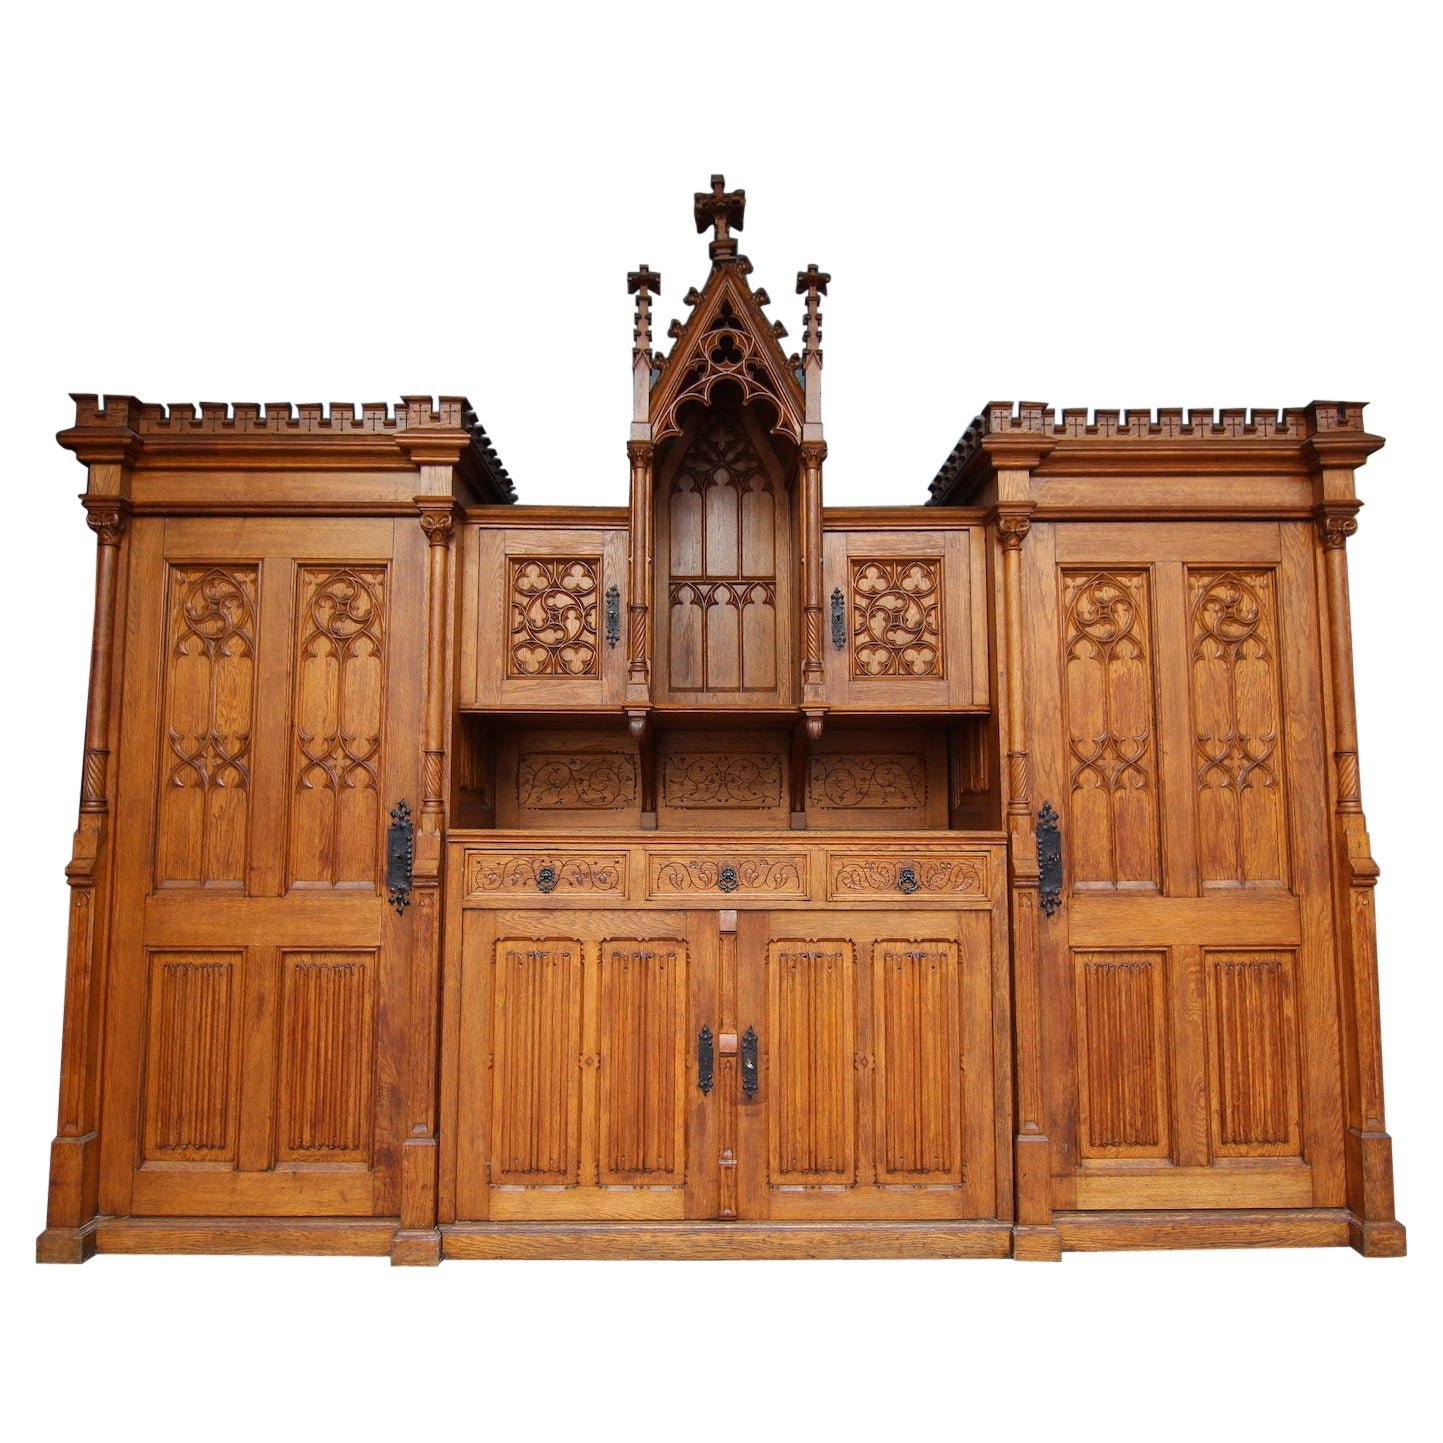 Large Early 20th Century German Gothic Revival Sacristy Cabinet